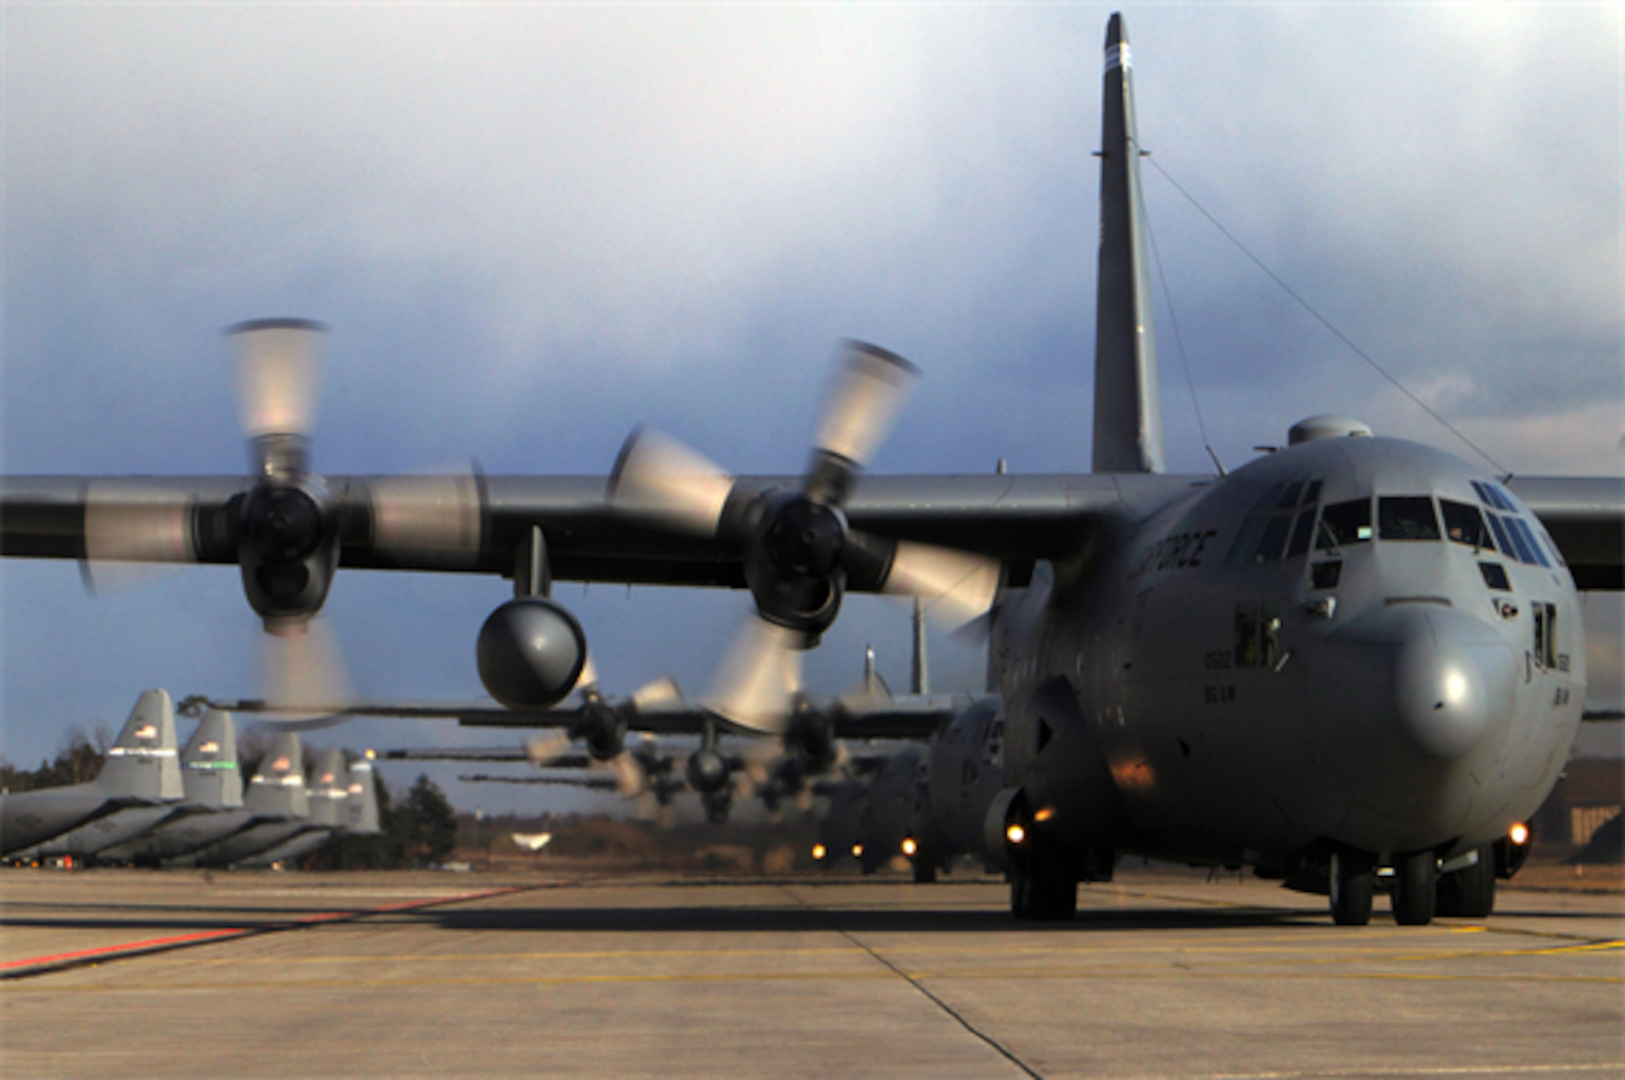 A line of C-130 aircraft prepare to depart for mass tactical training. 